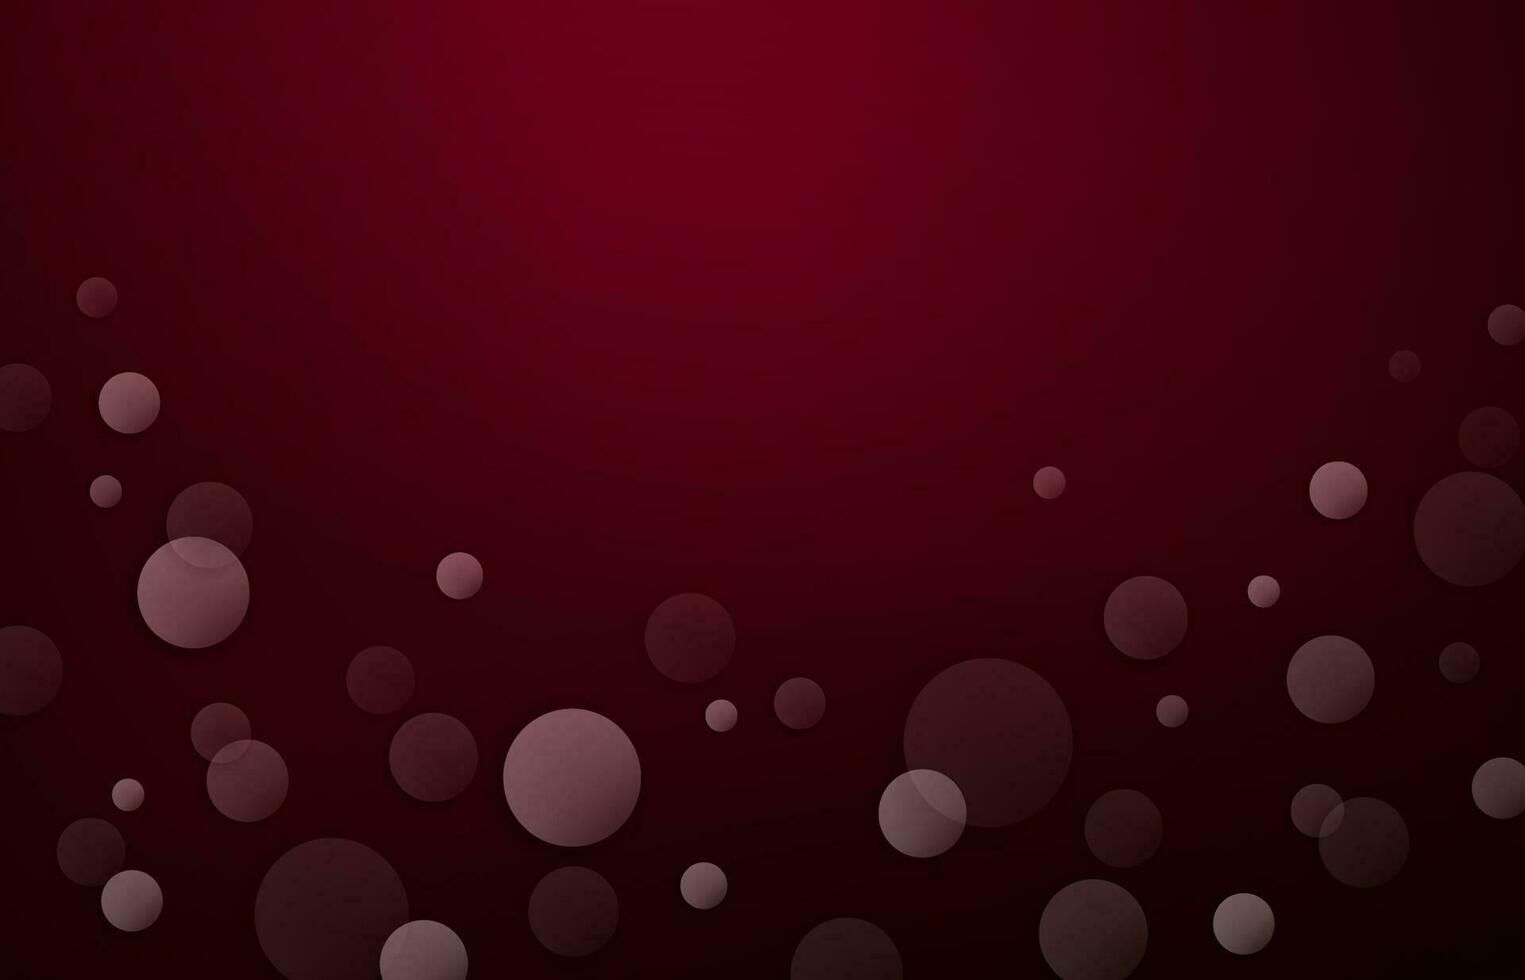 The circles are drawn randomly on a dark red background. vector